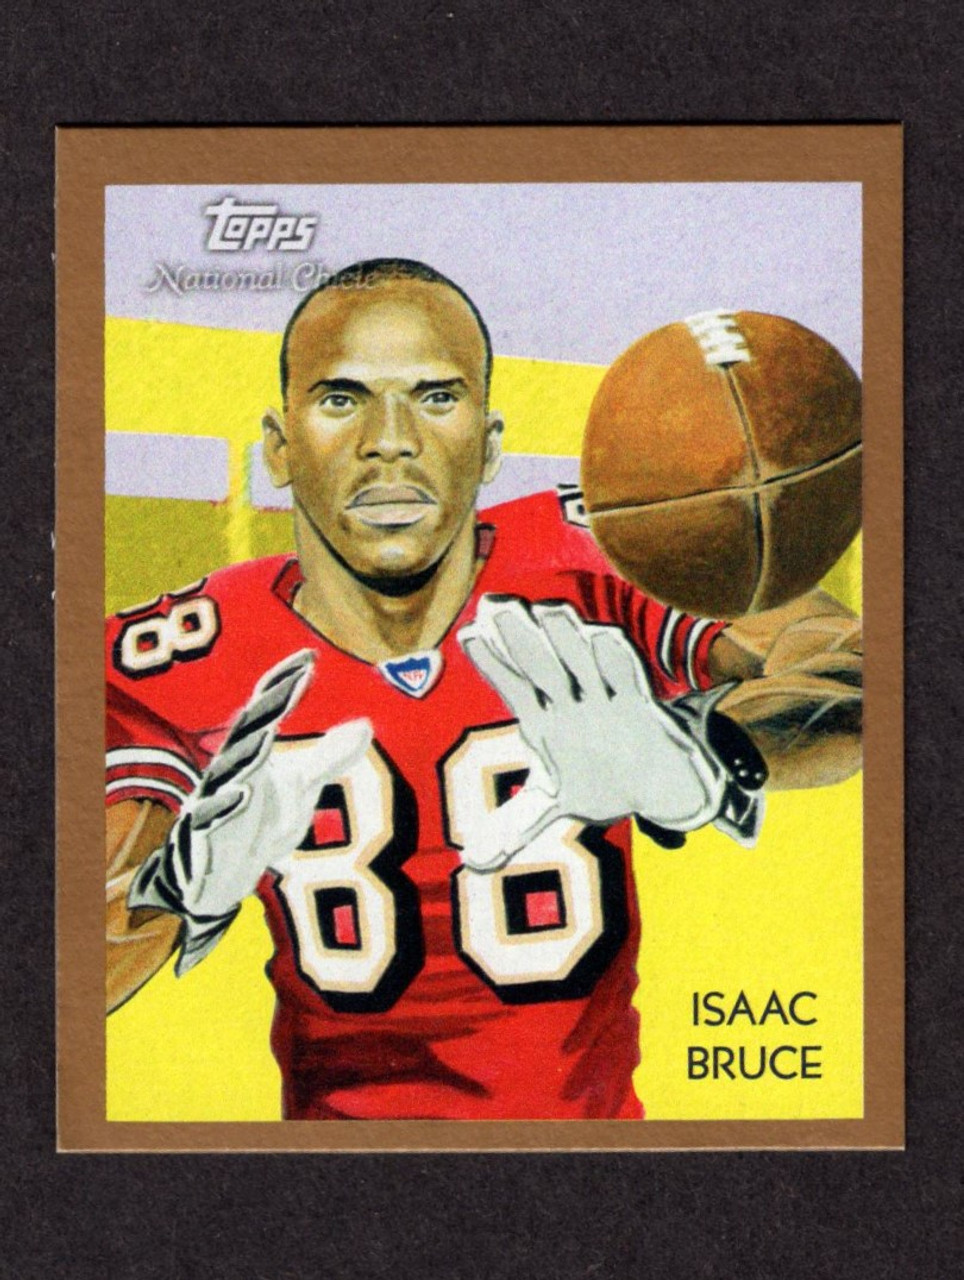 2009 Topps National Chicle #C159 Isaac Bruce Gold Mini